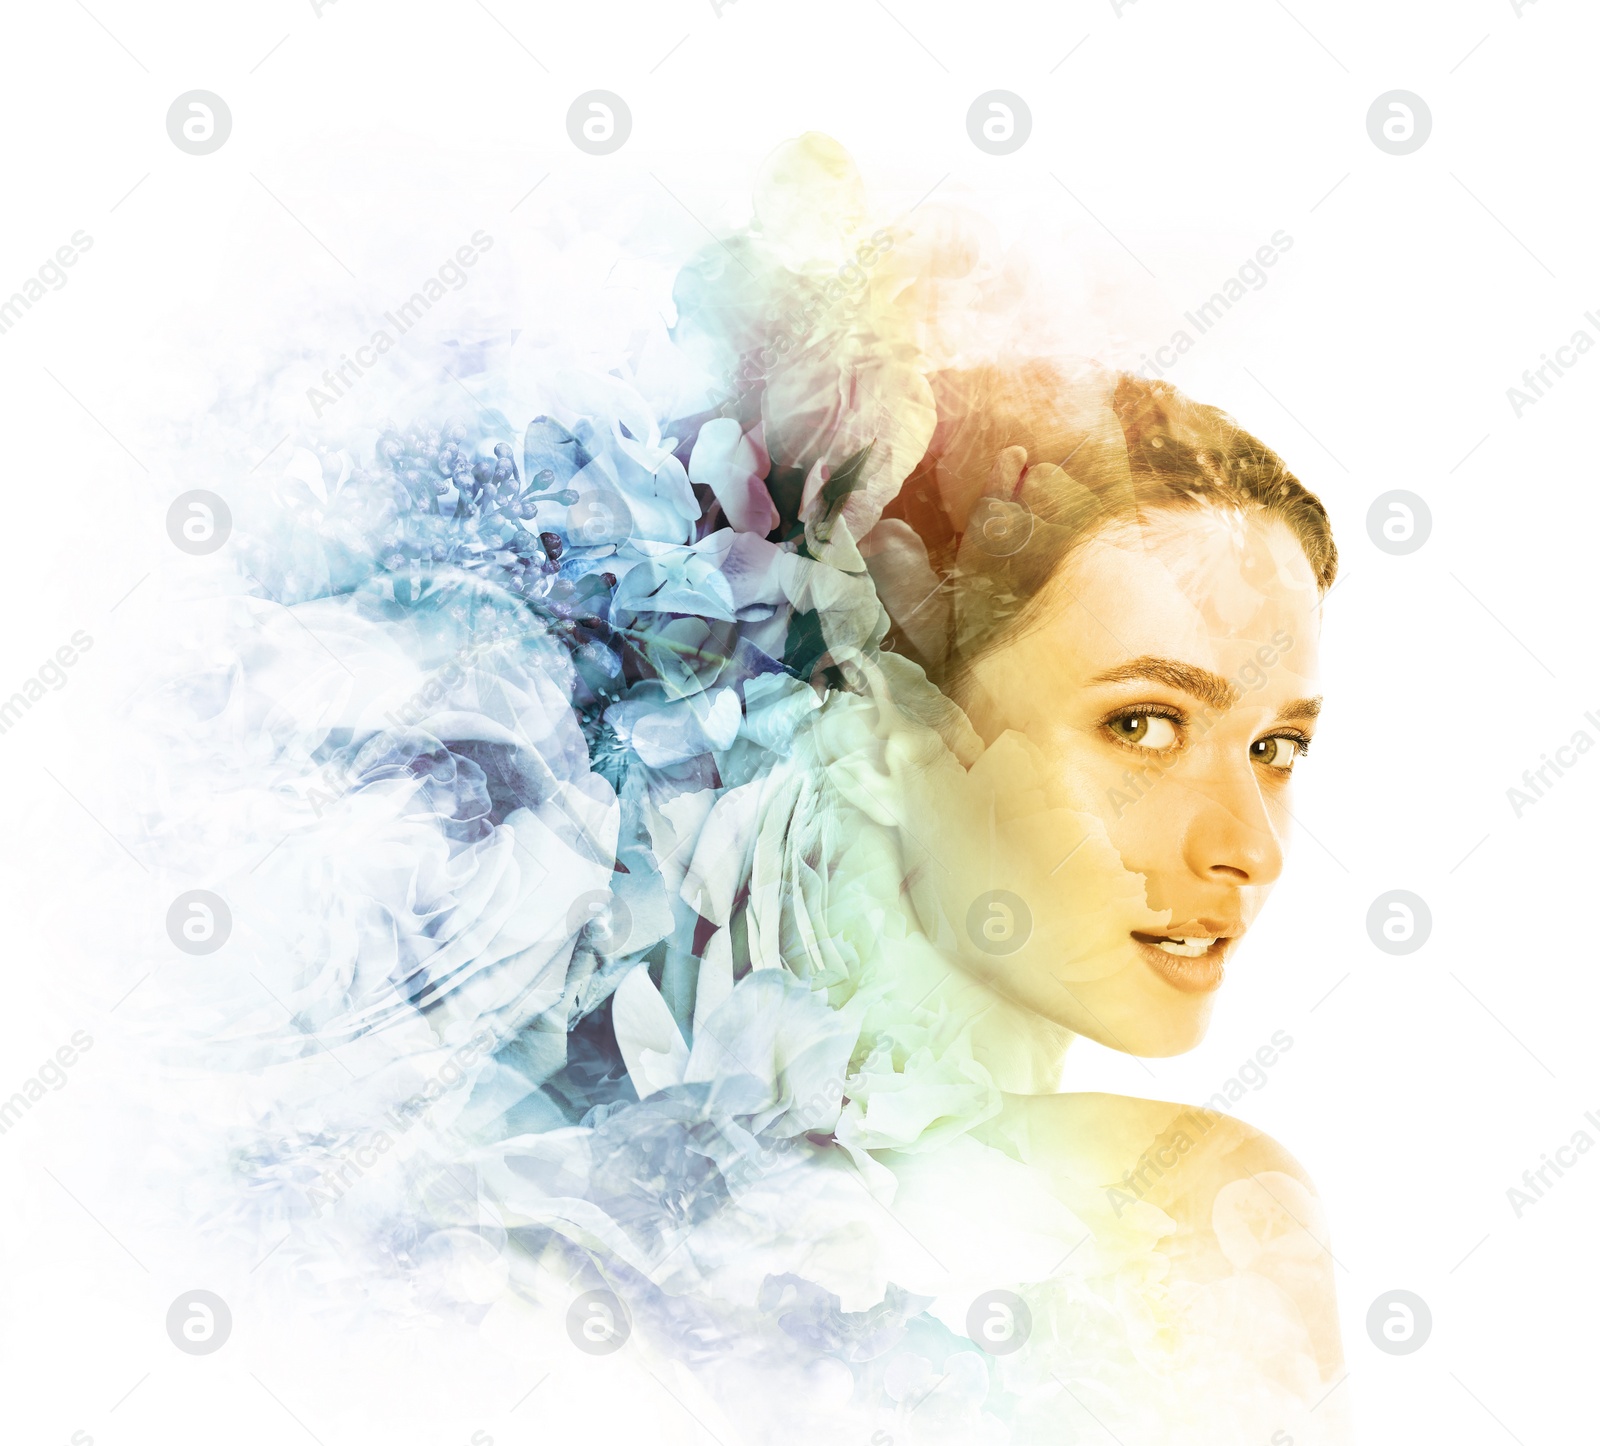 Image of Double exposure of beautiful woman and blooming flowers